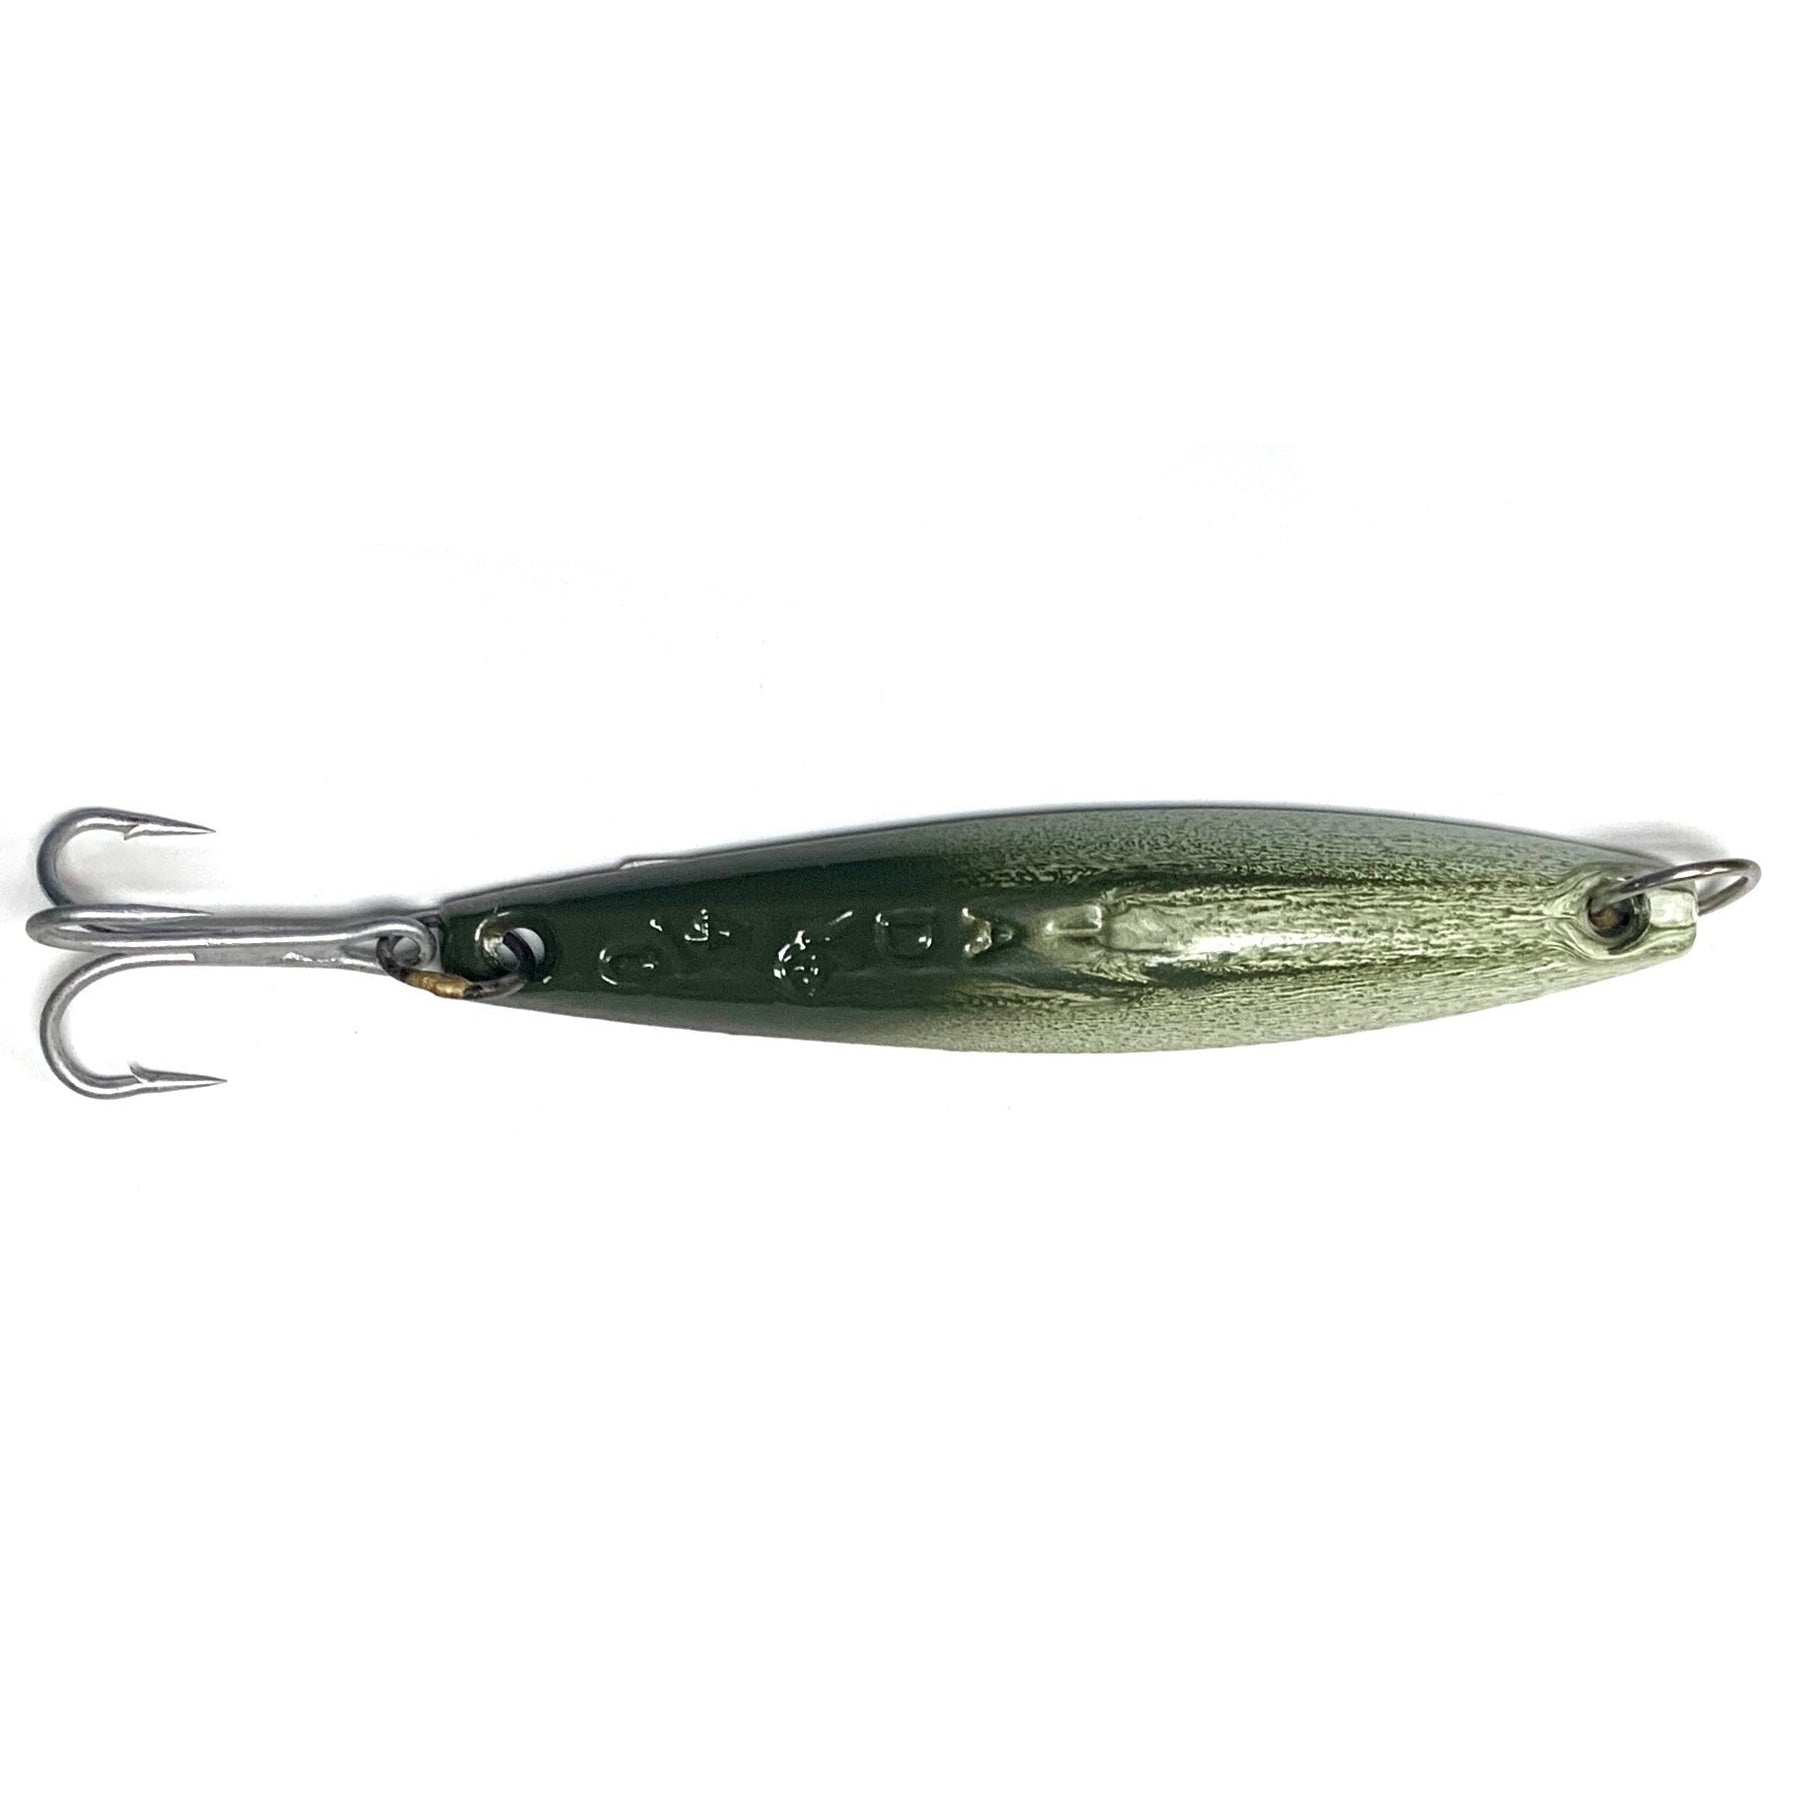 PENN Fishing - Whether it's vertical jigging or casting lures, the